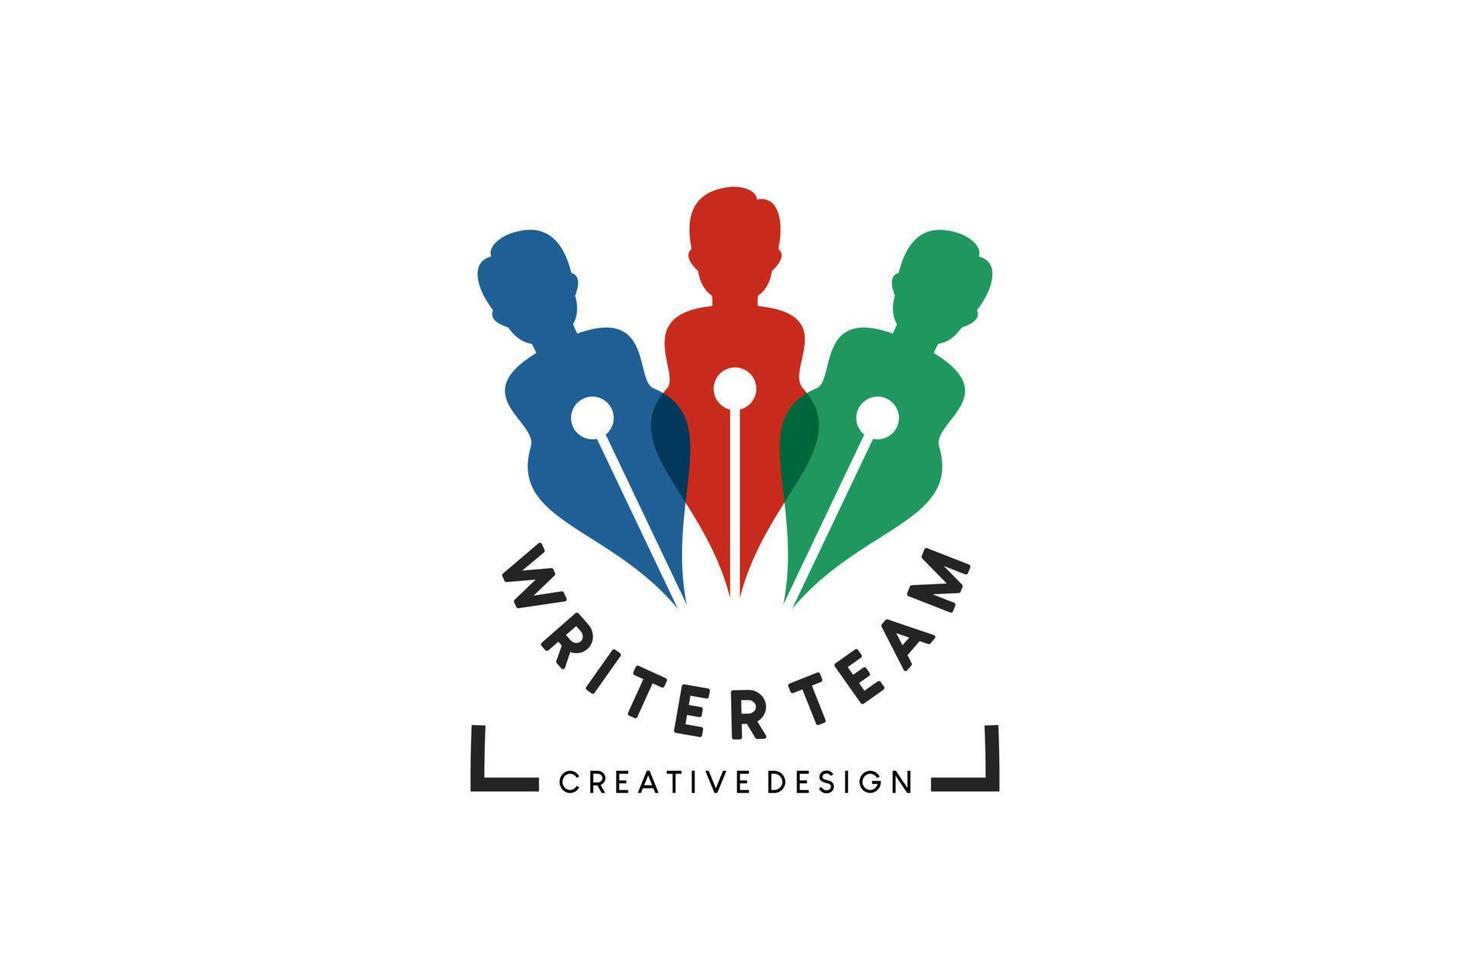 Pen icon design with people icon for author and education team or group logo vector